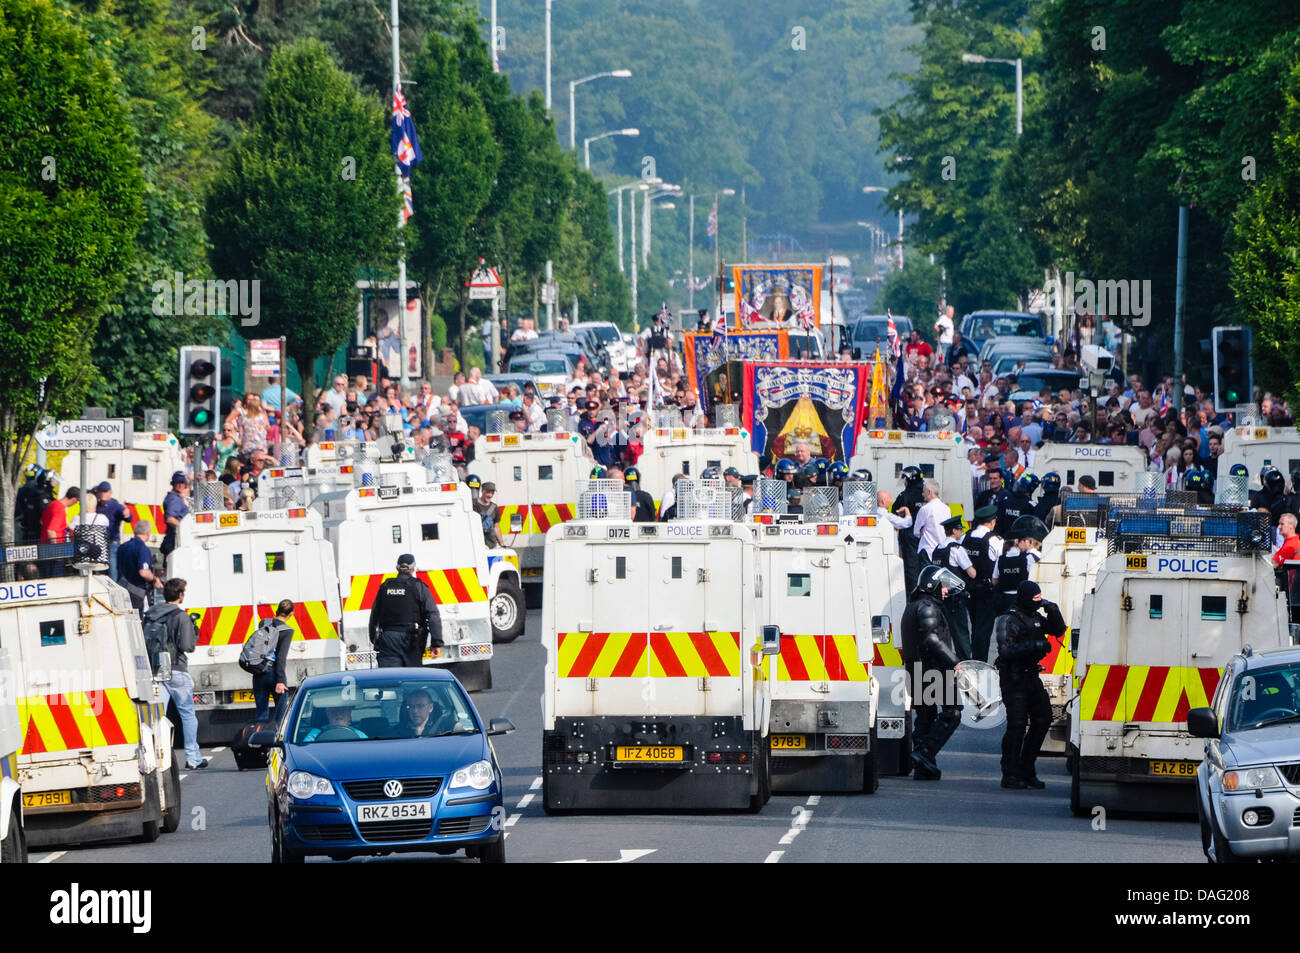 Belfast, Northern Ireland, 12th July 2013 - Hundreds of Orange Order members, bandsmen and supports are prevented from proceeding by PSNI armoured Landrovers and officers in riot gear. Credit:  Stephen Barnes/Alamy Live News Stock Photo